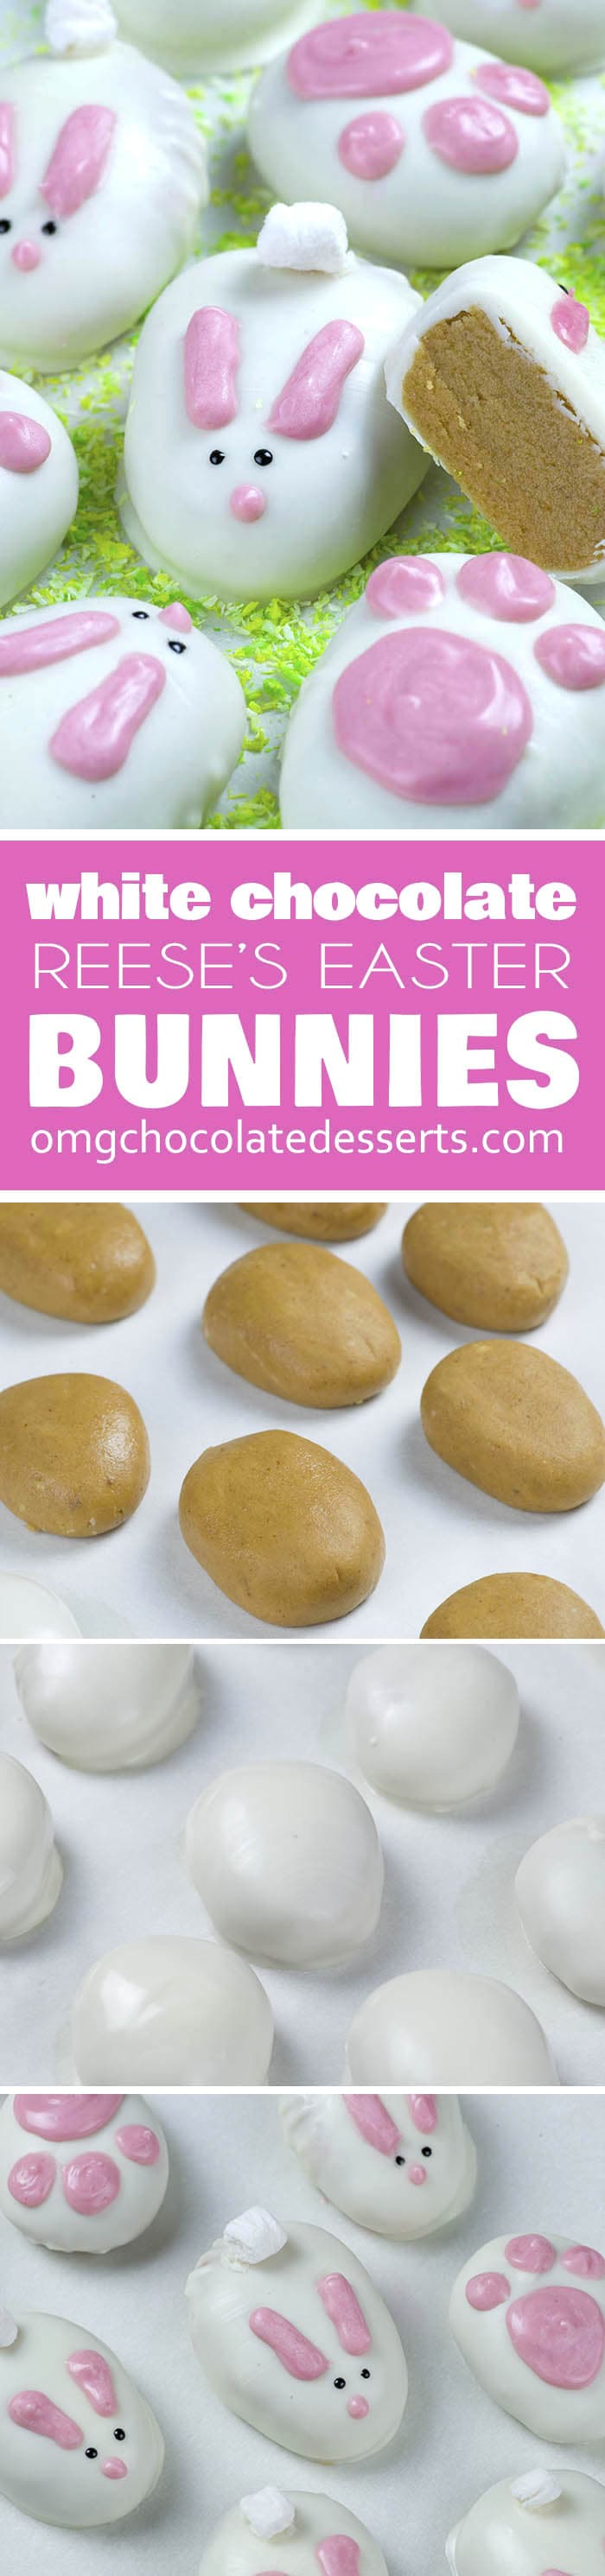 Easter desserts like these White Chocolate Reese’s Easter Bunnies will satisfy any sweet tooth and add festive flair to your Easter party or brunch. 